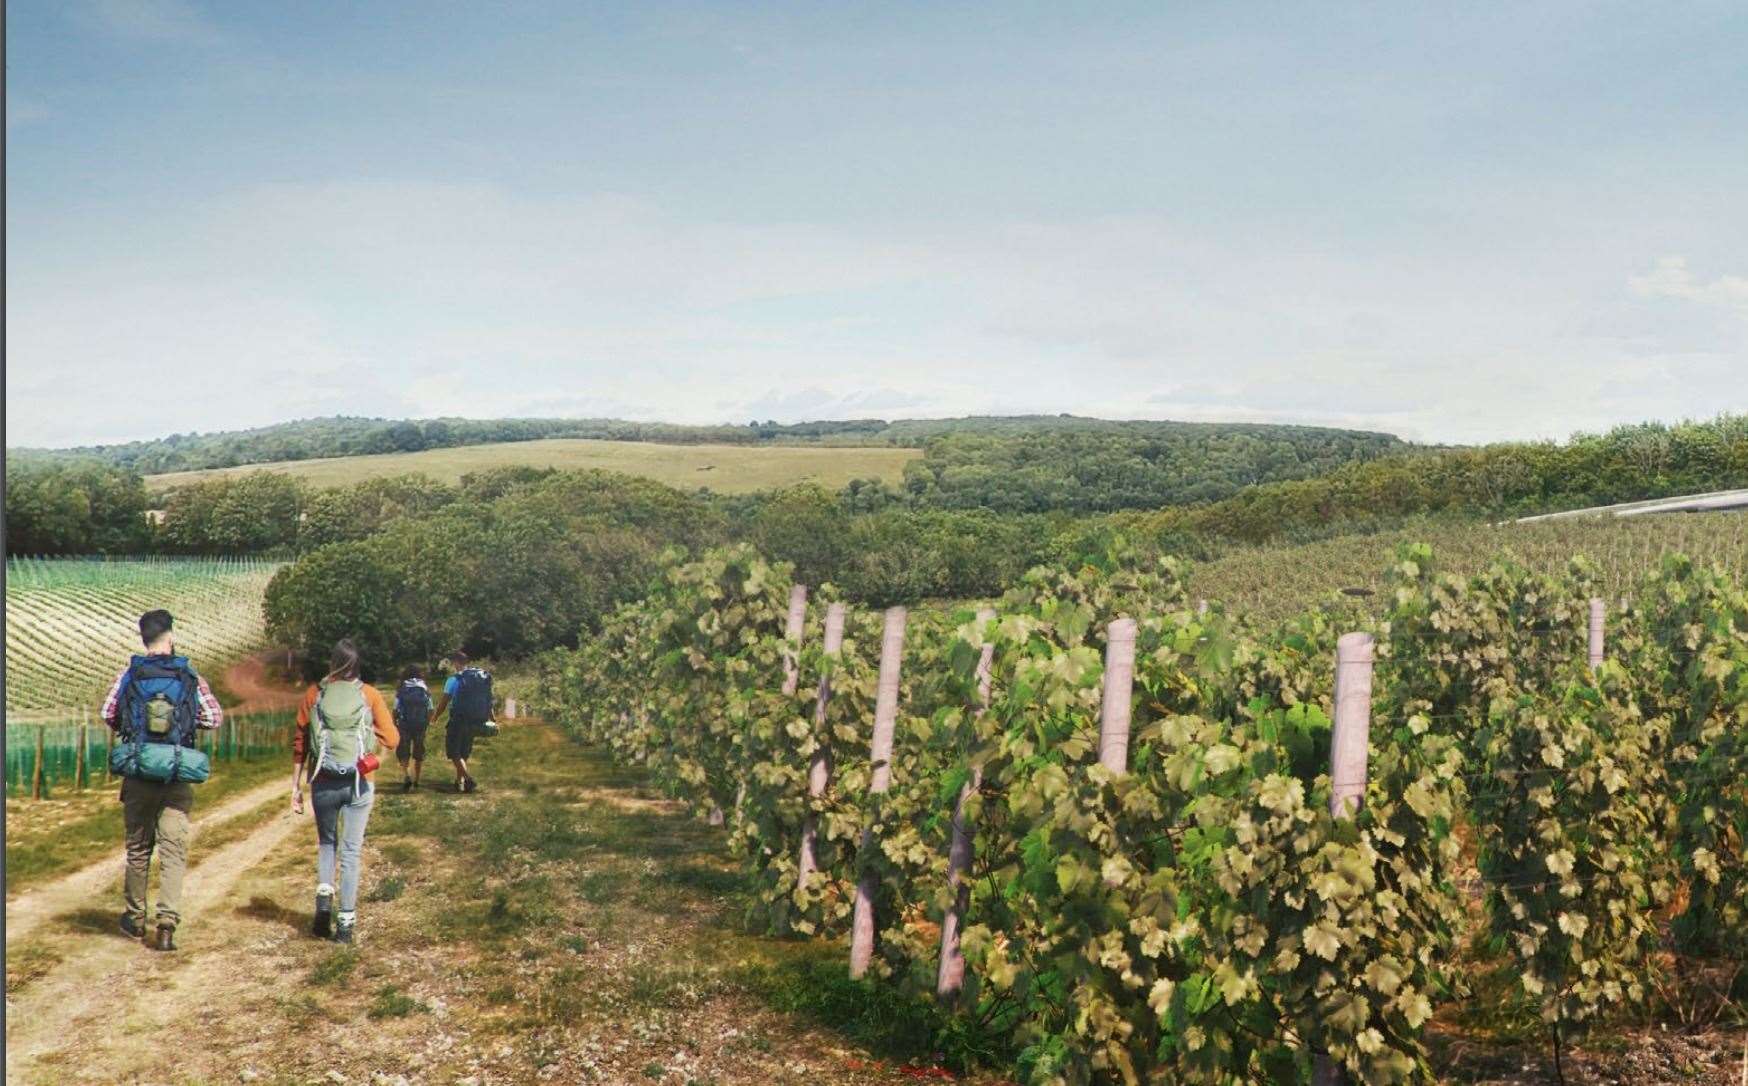 Vineyard Farms Ltd want to invest £30 million into the scheme. Picture: Vineyard Farms Ltd/ Foster + Partners